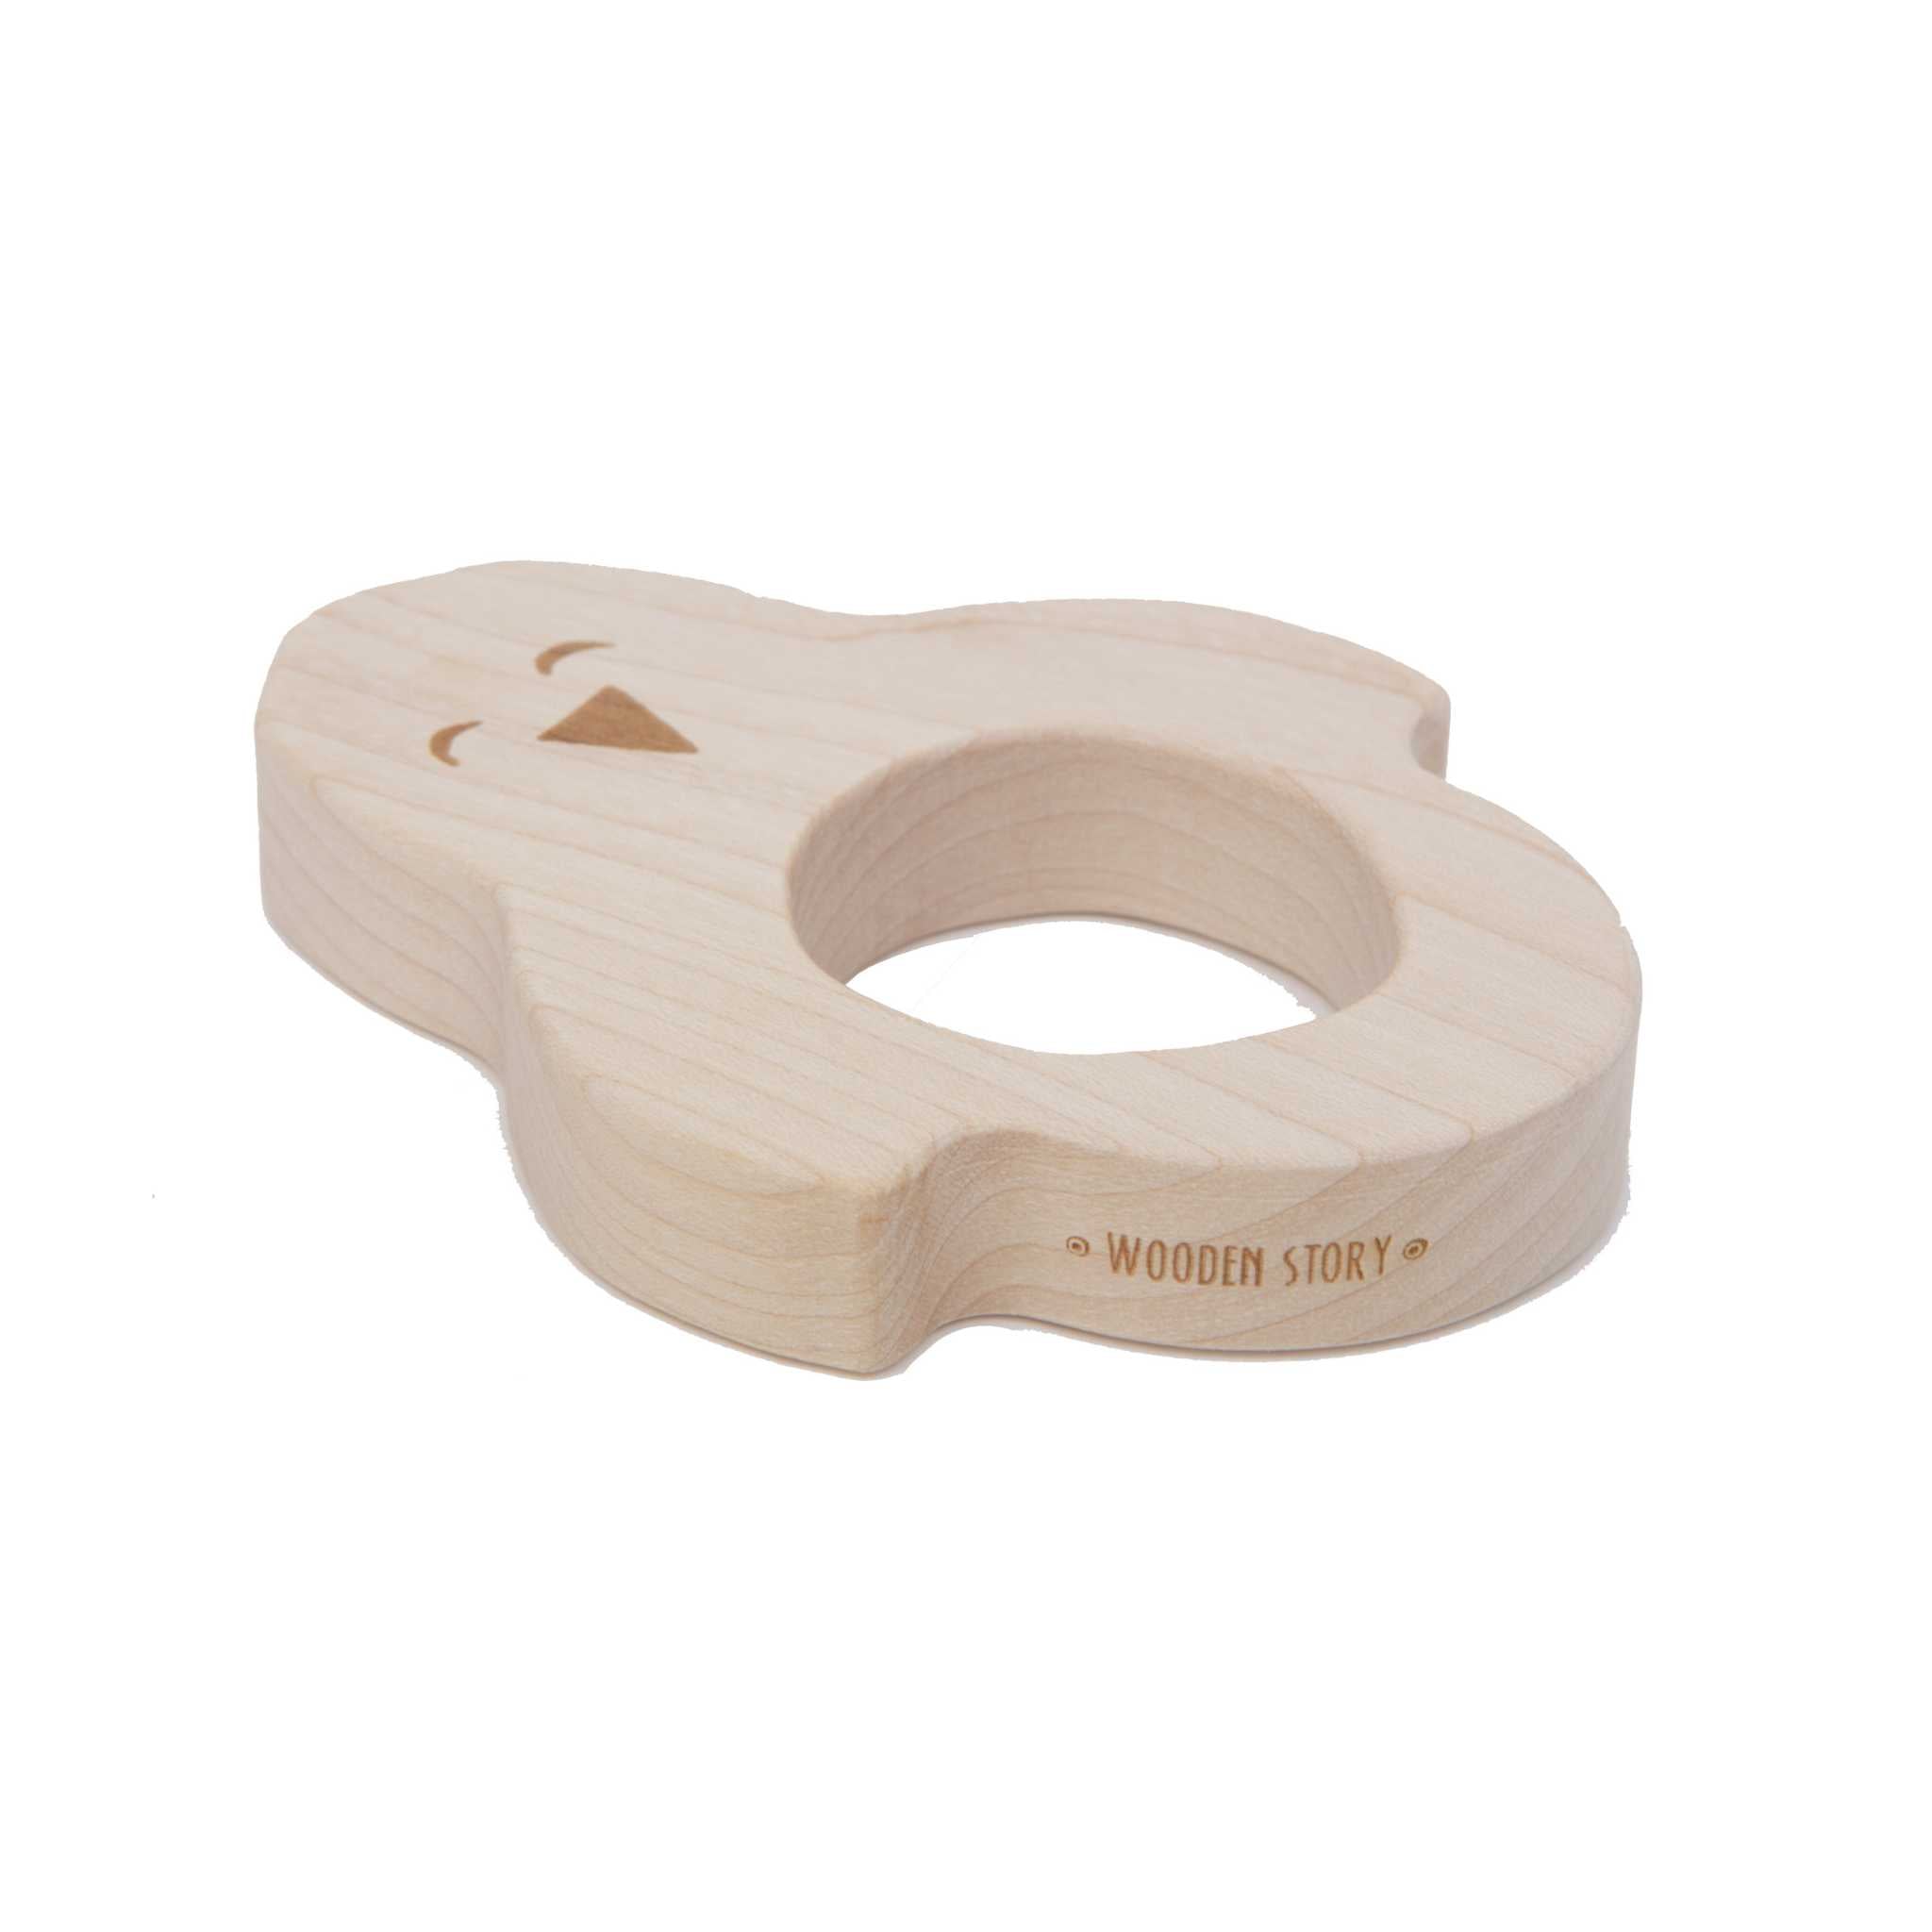 Wooden Story Penguin Teether - Side View